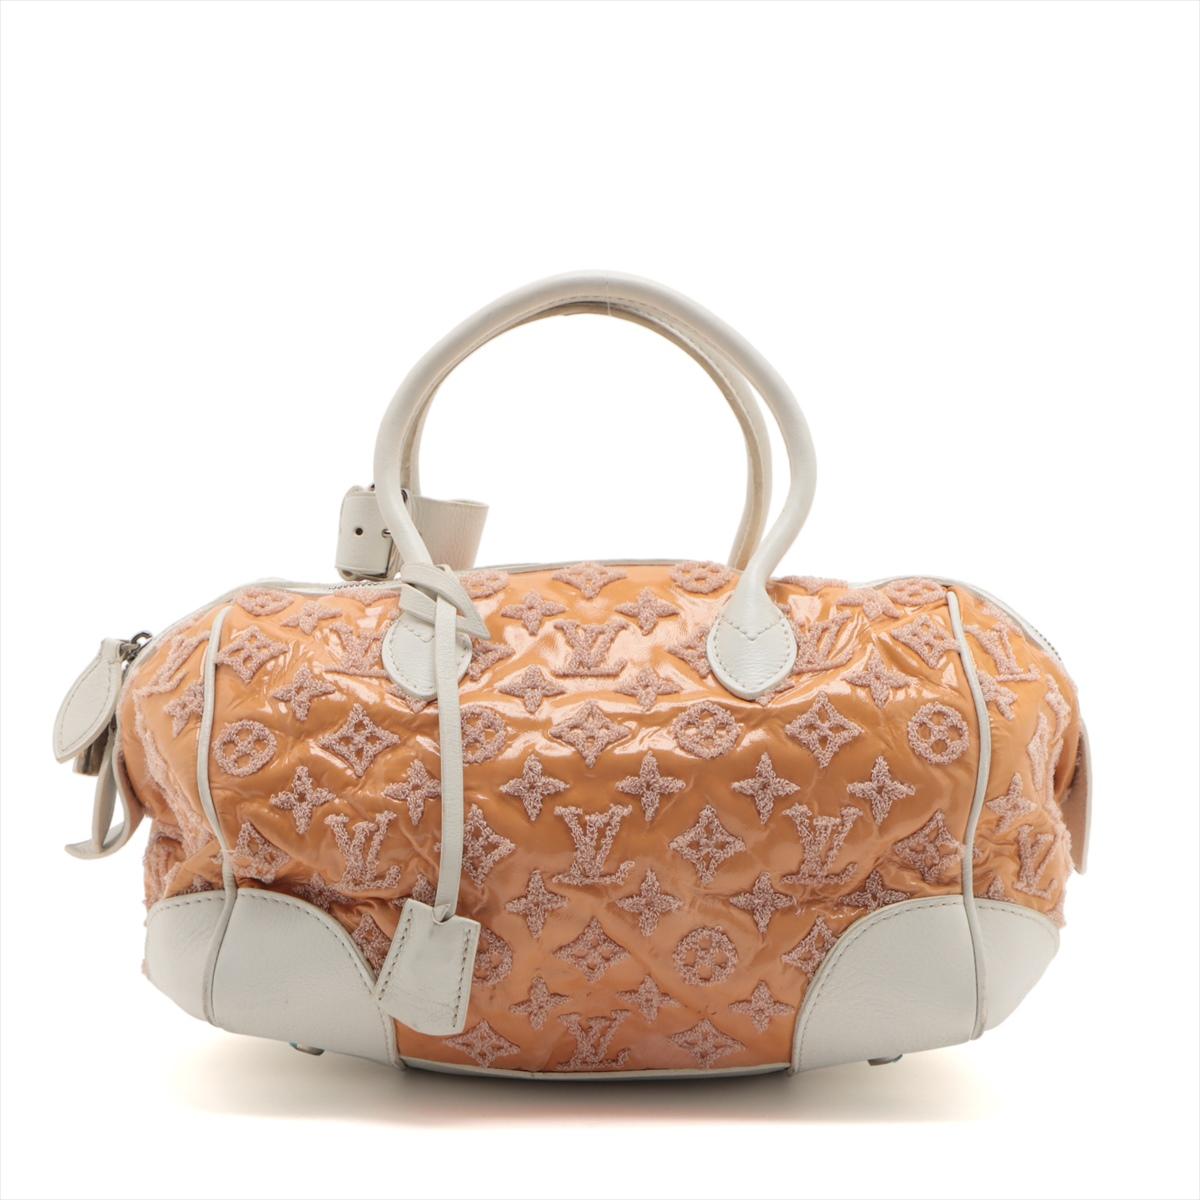 The Louis Vuitton Monogram Bouclettes Speedy Round bag in Rose Gold x White is a luxurious and stylish accessory that exudes elegance. Crafted from the brand's iconic Monogram canvas with a unique bouclettes texture, the bag showcases exquisite